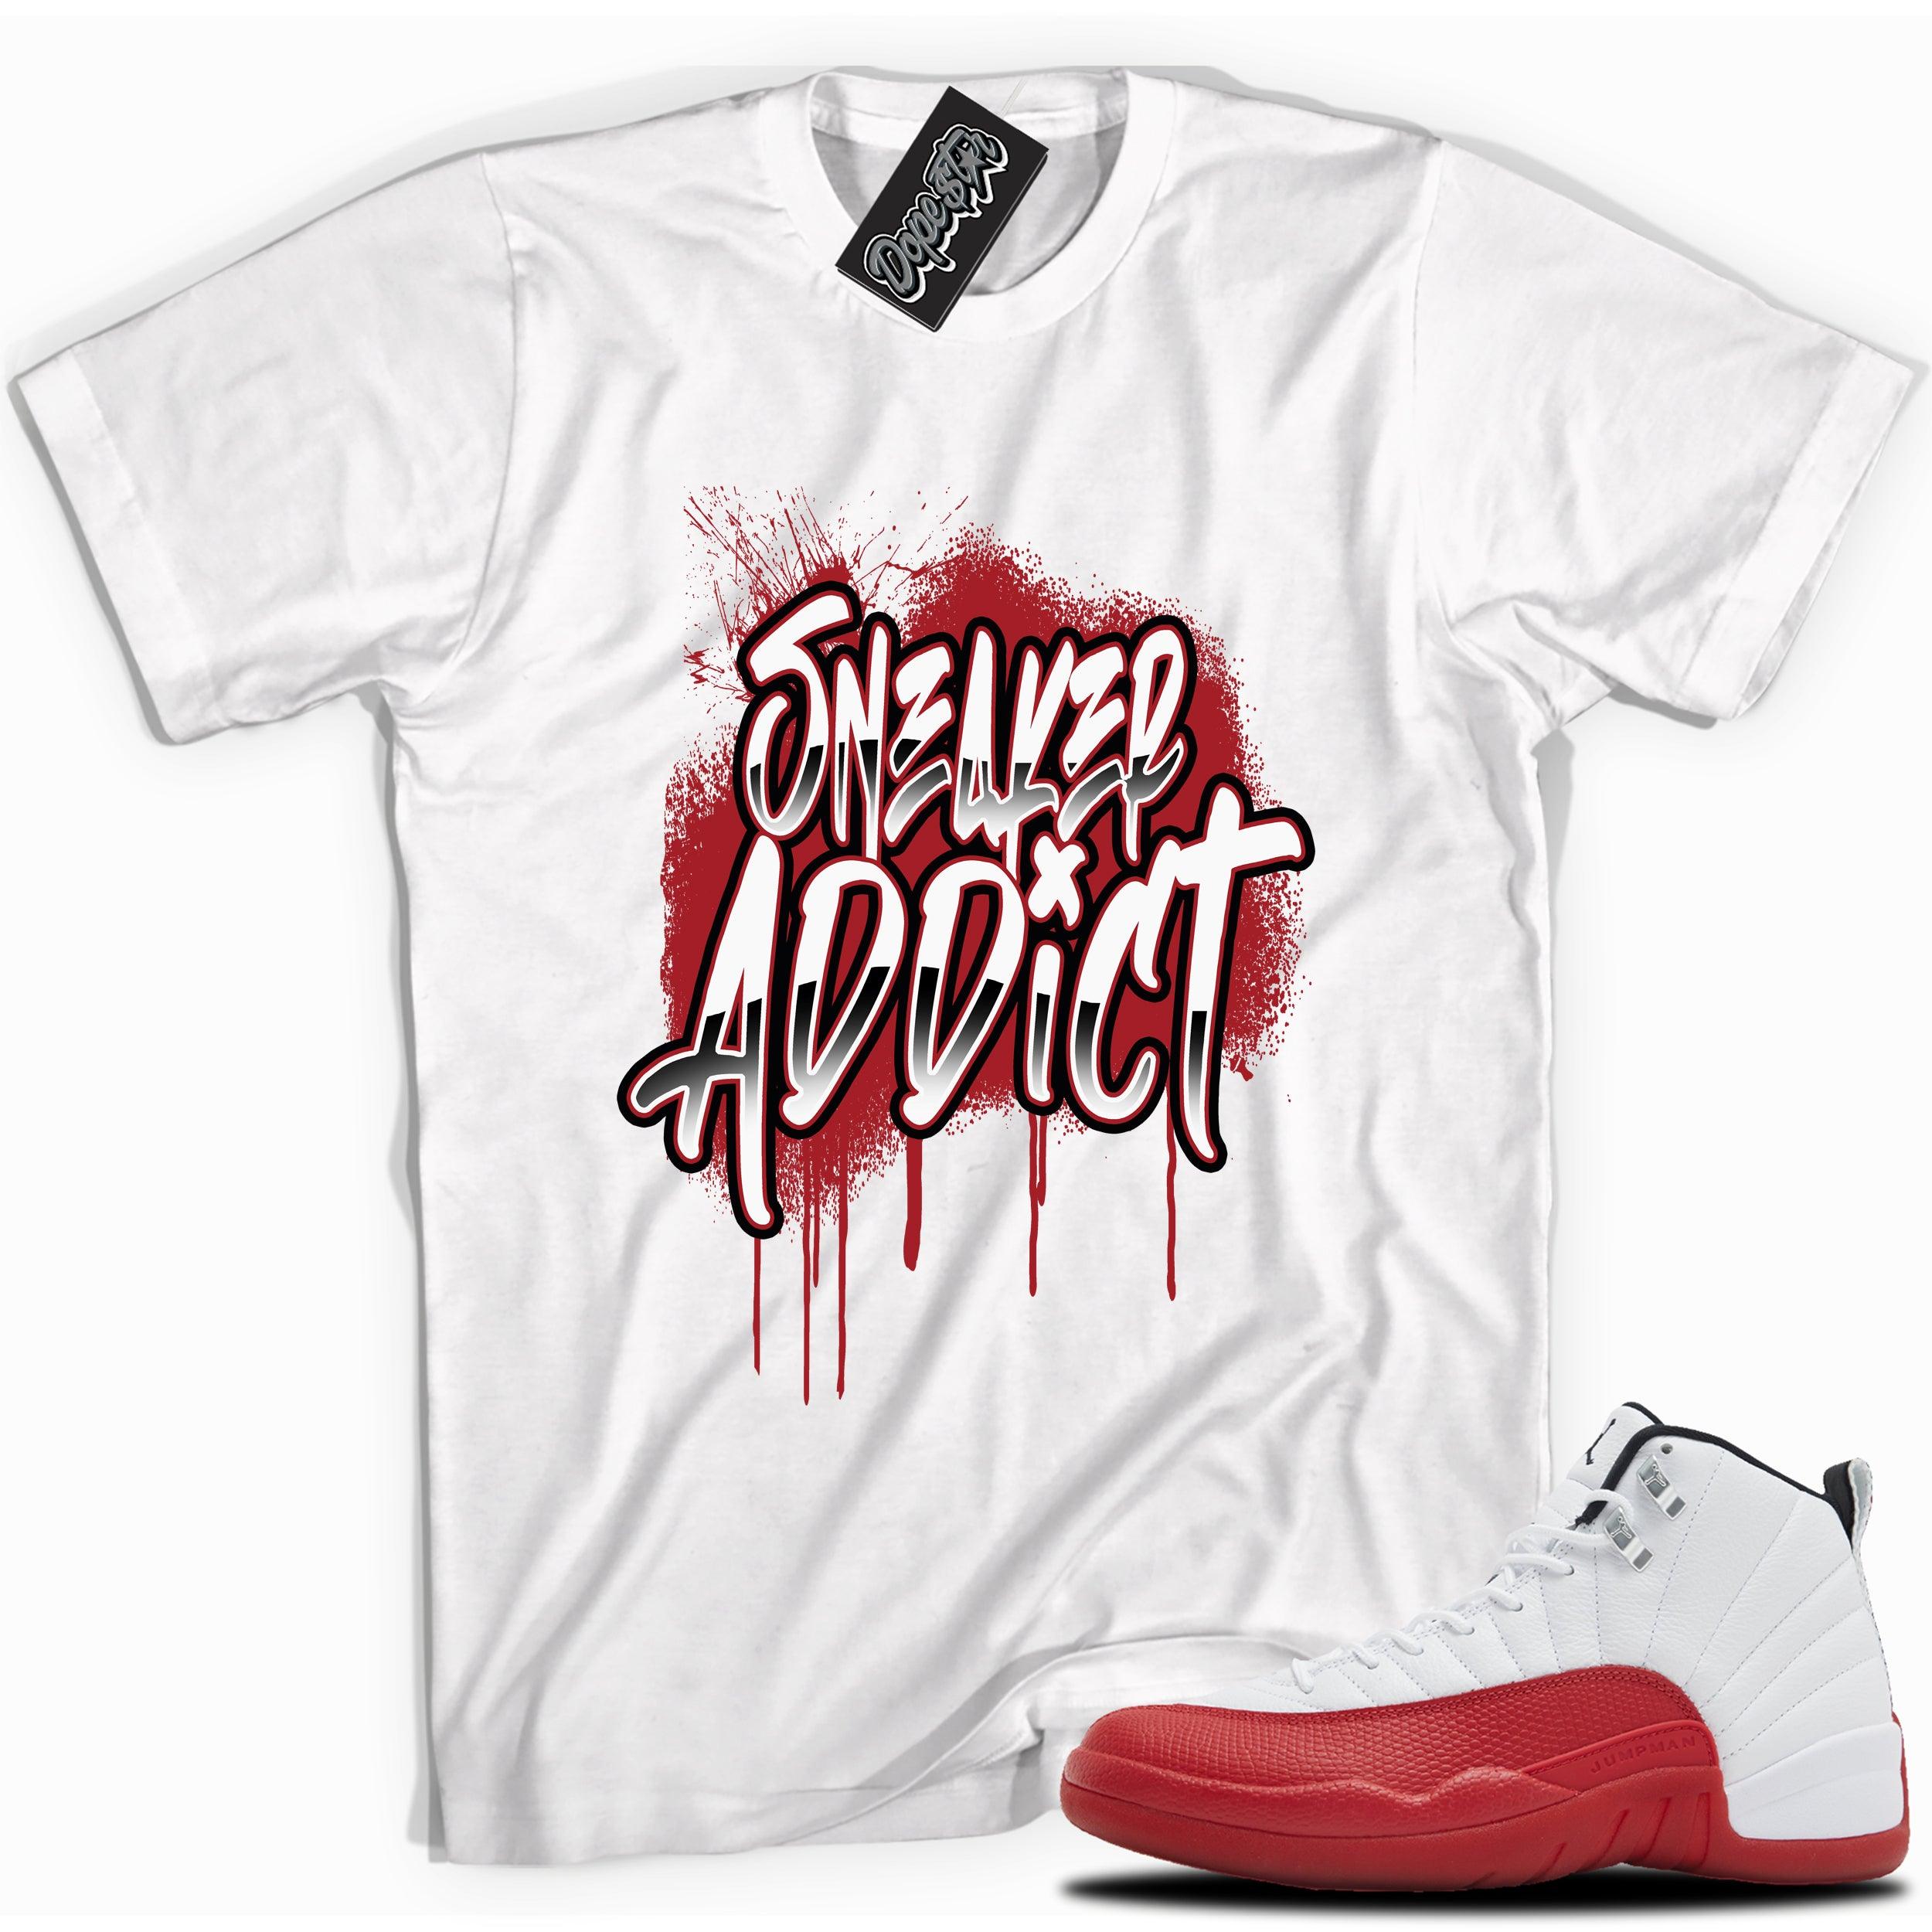 Cool White graphic tee with “Sneaker Addict” print, that perfectly matches Air Jordan 12 Retro Cherry Red 2023 red and white sneakers